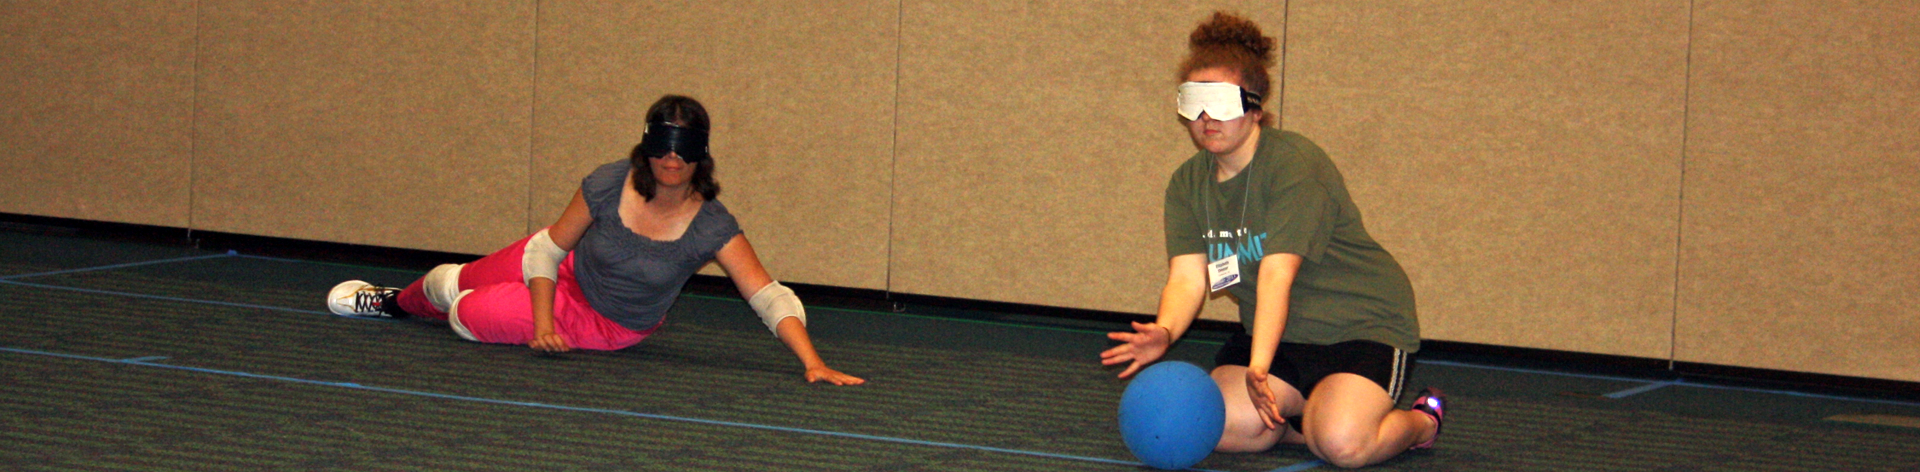 Two young members wearing sleepshades play goal ball. One reaches out to stop the ball from crossing into the goal.